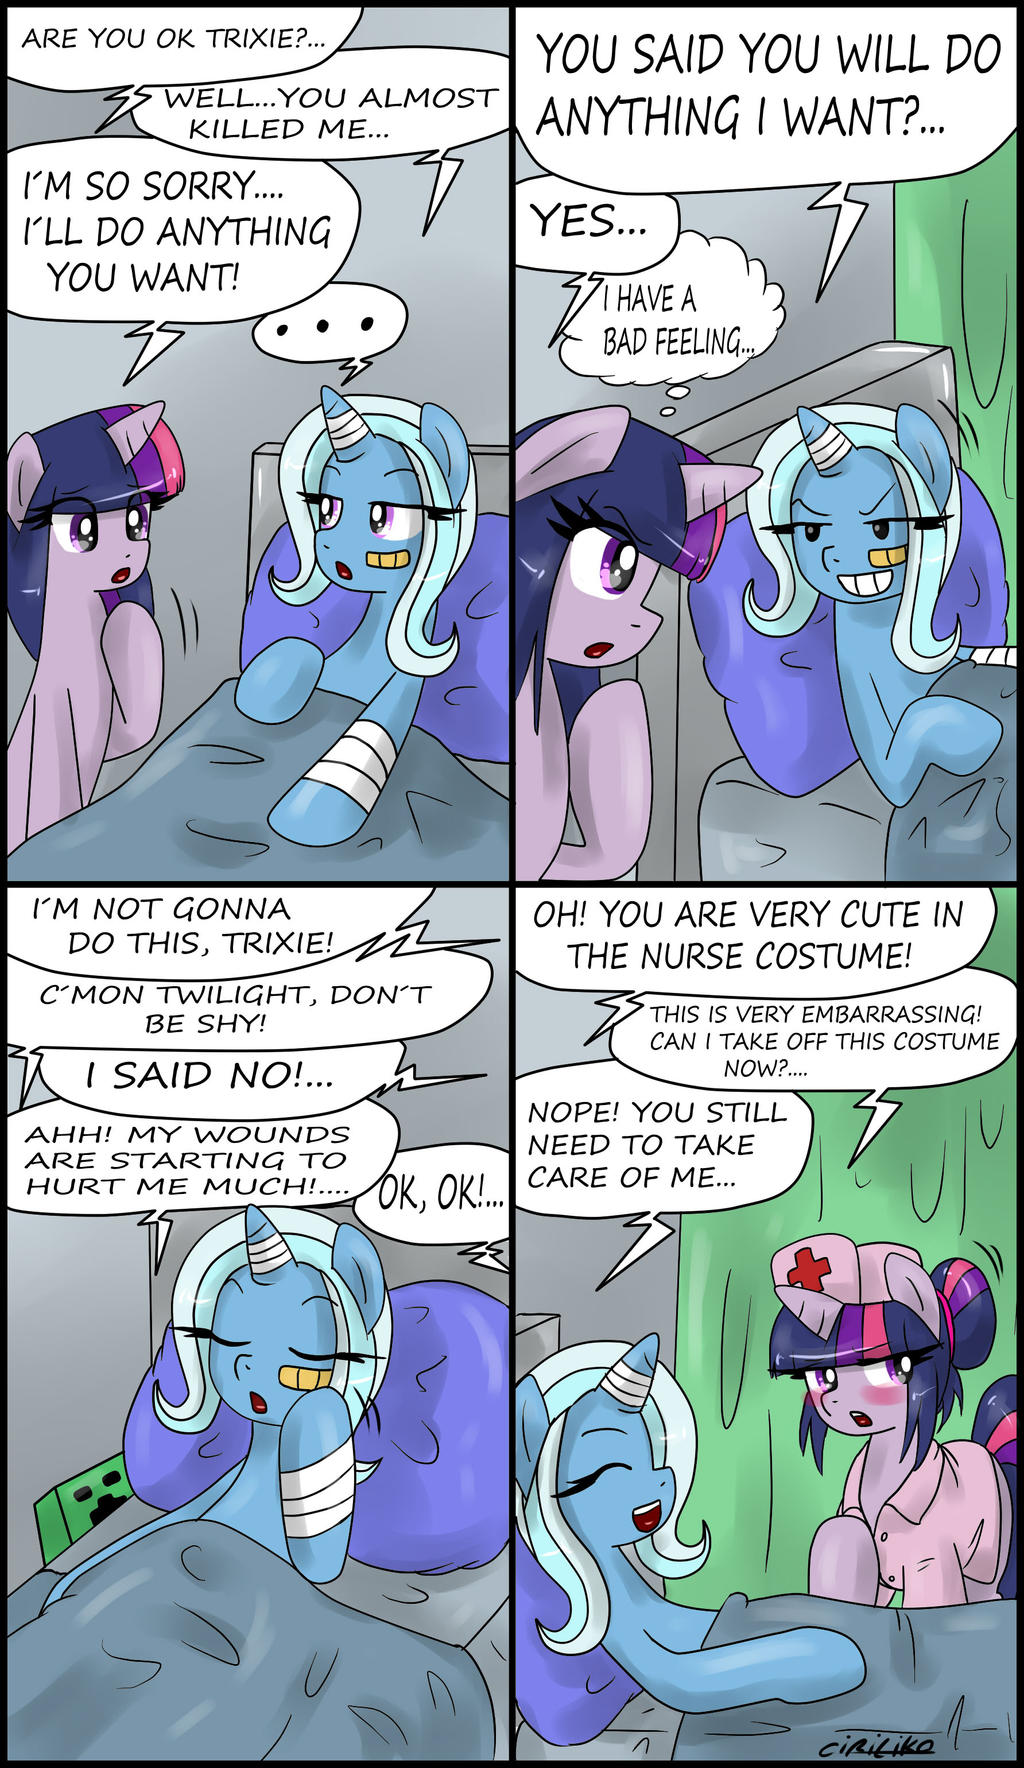 A new trixie 13